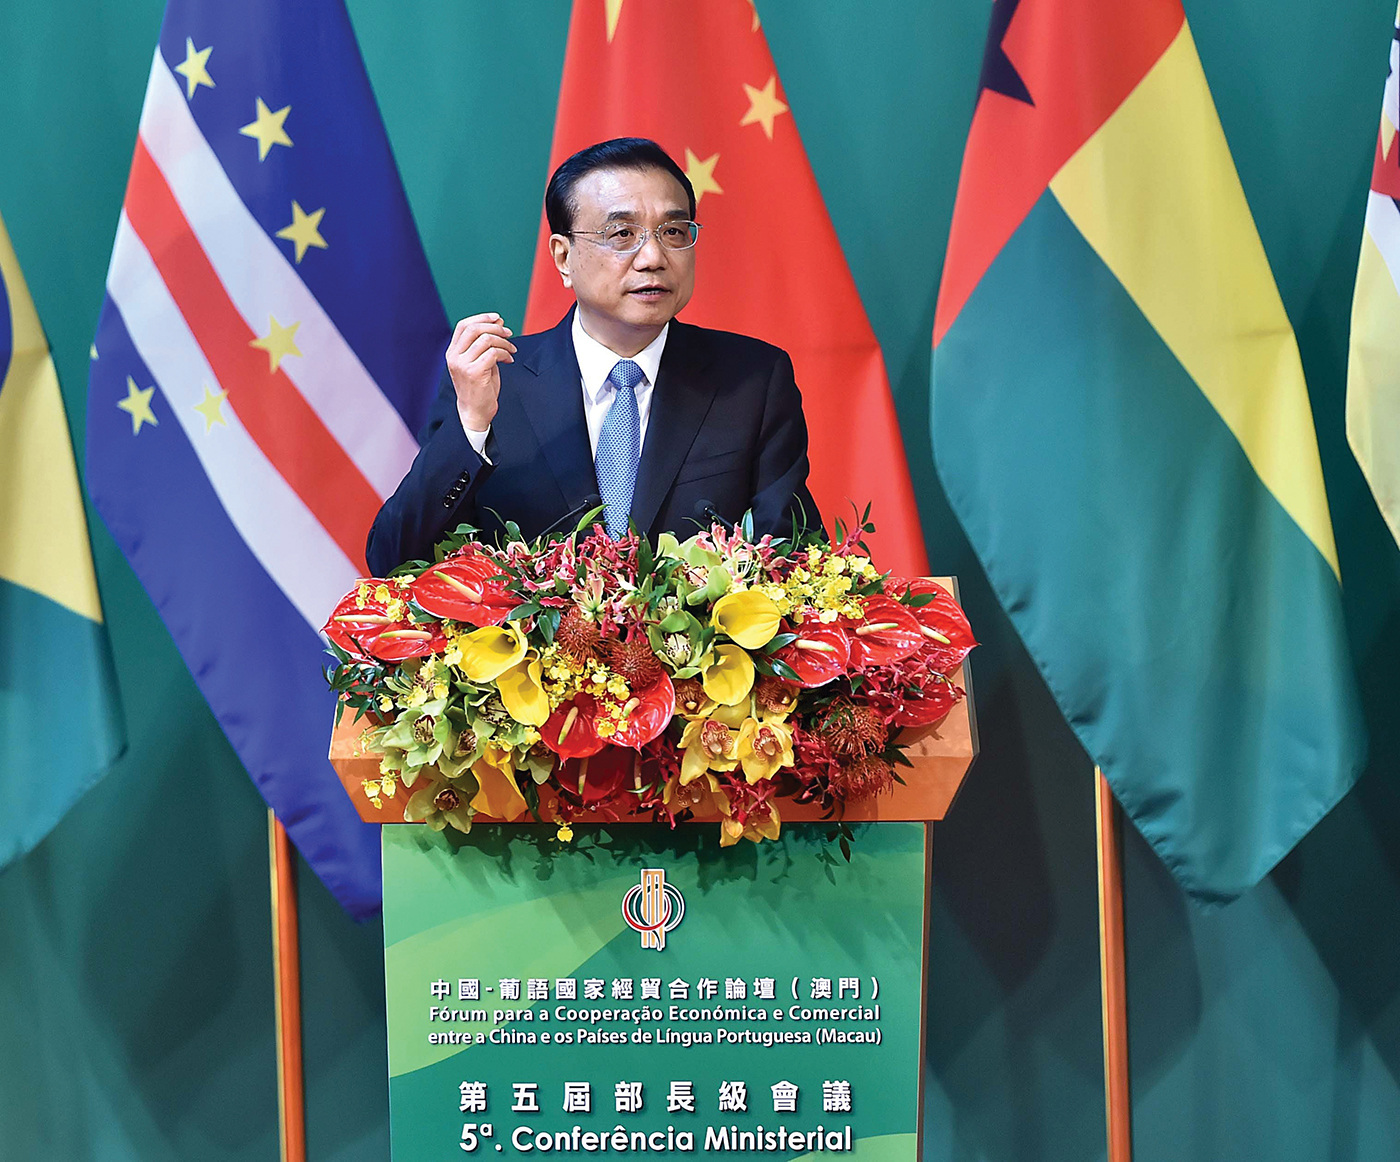 At the 5th Ministerial Conference in 2016, Chinese Premier Li Keqiang outlined a host of measures to and Portuguese-speaking countries